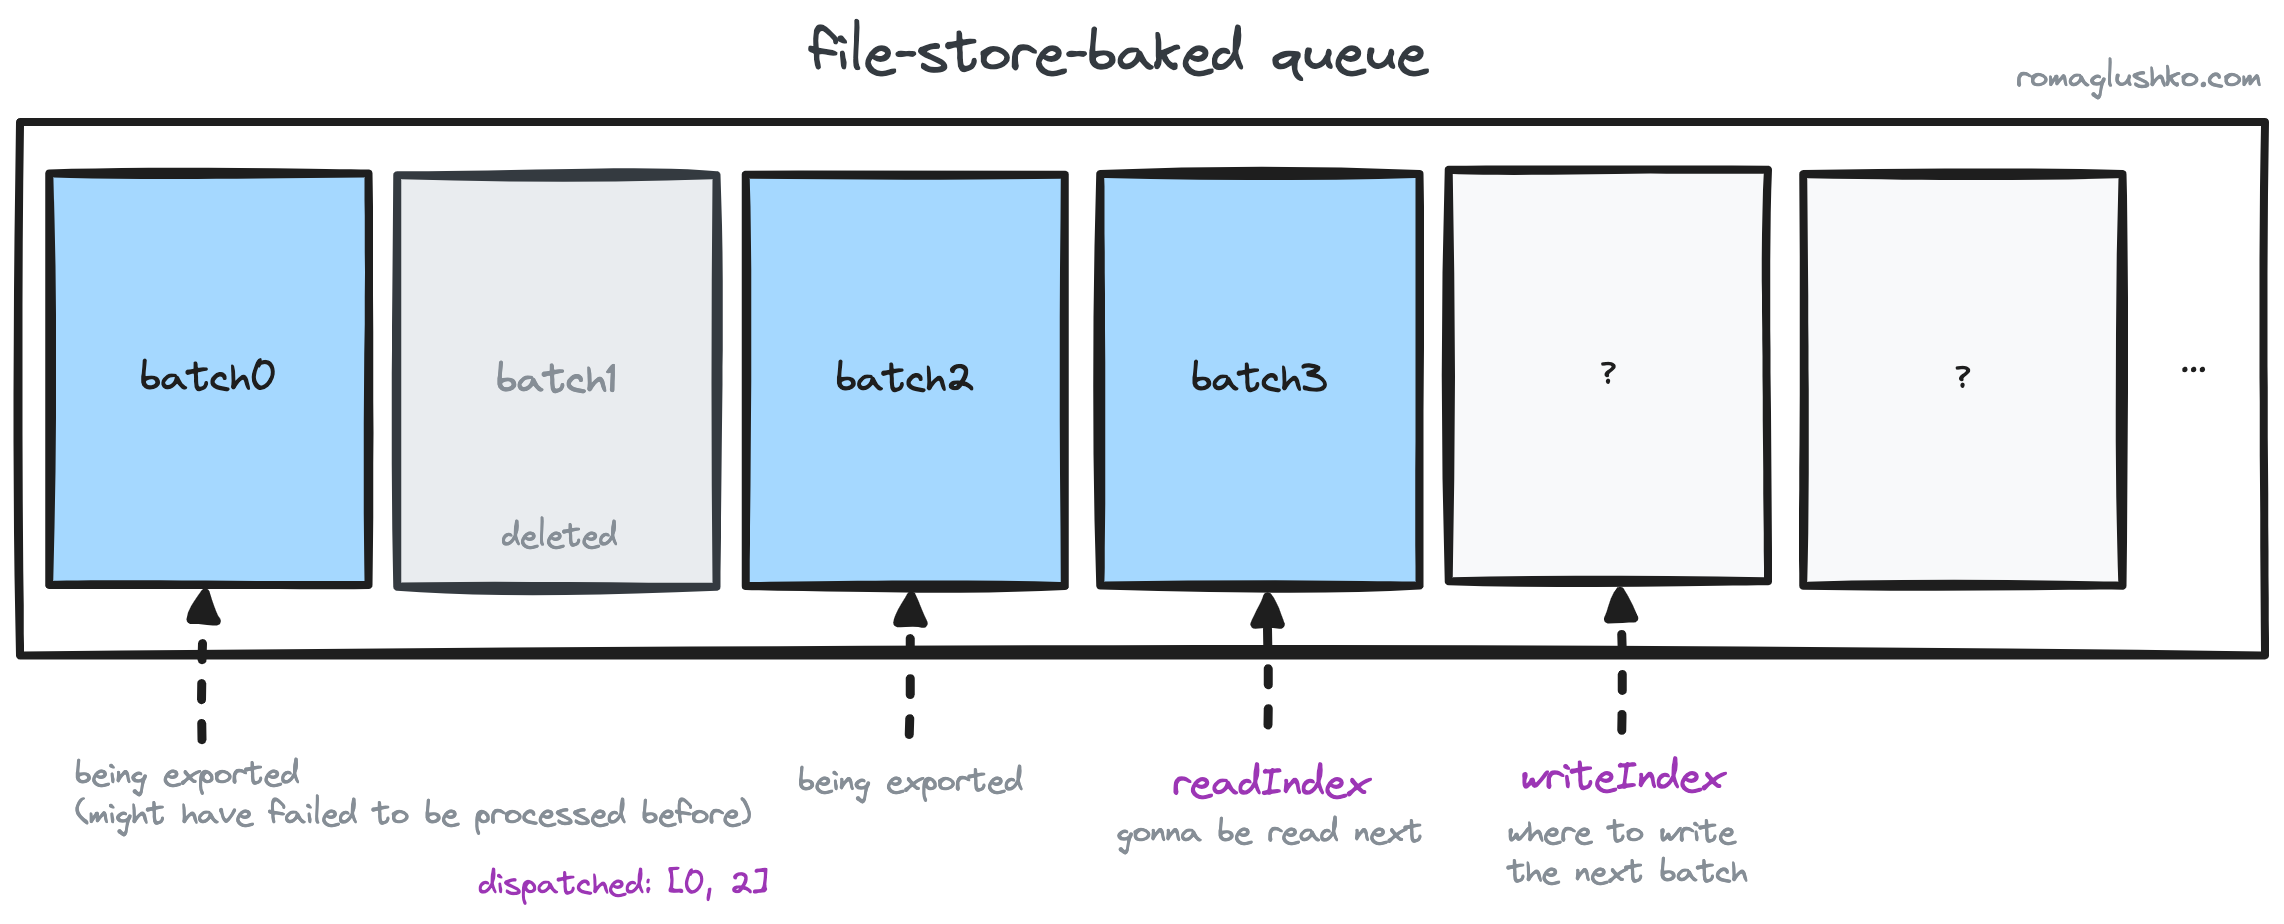 Processing of a file-store-based queue